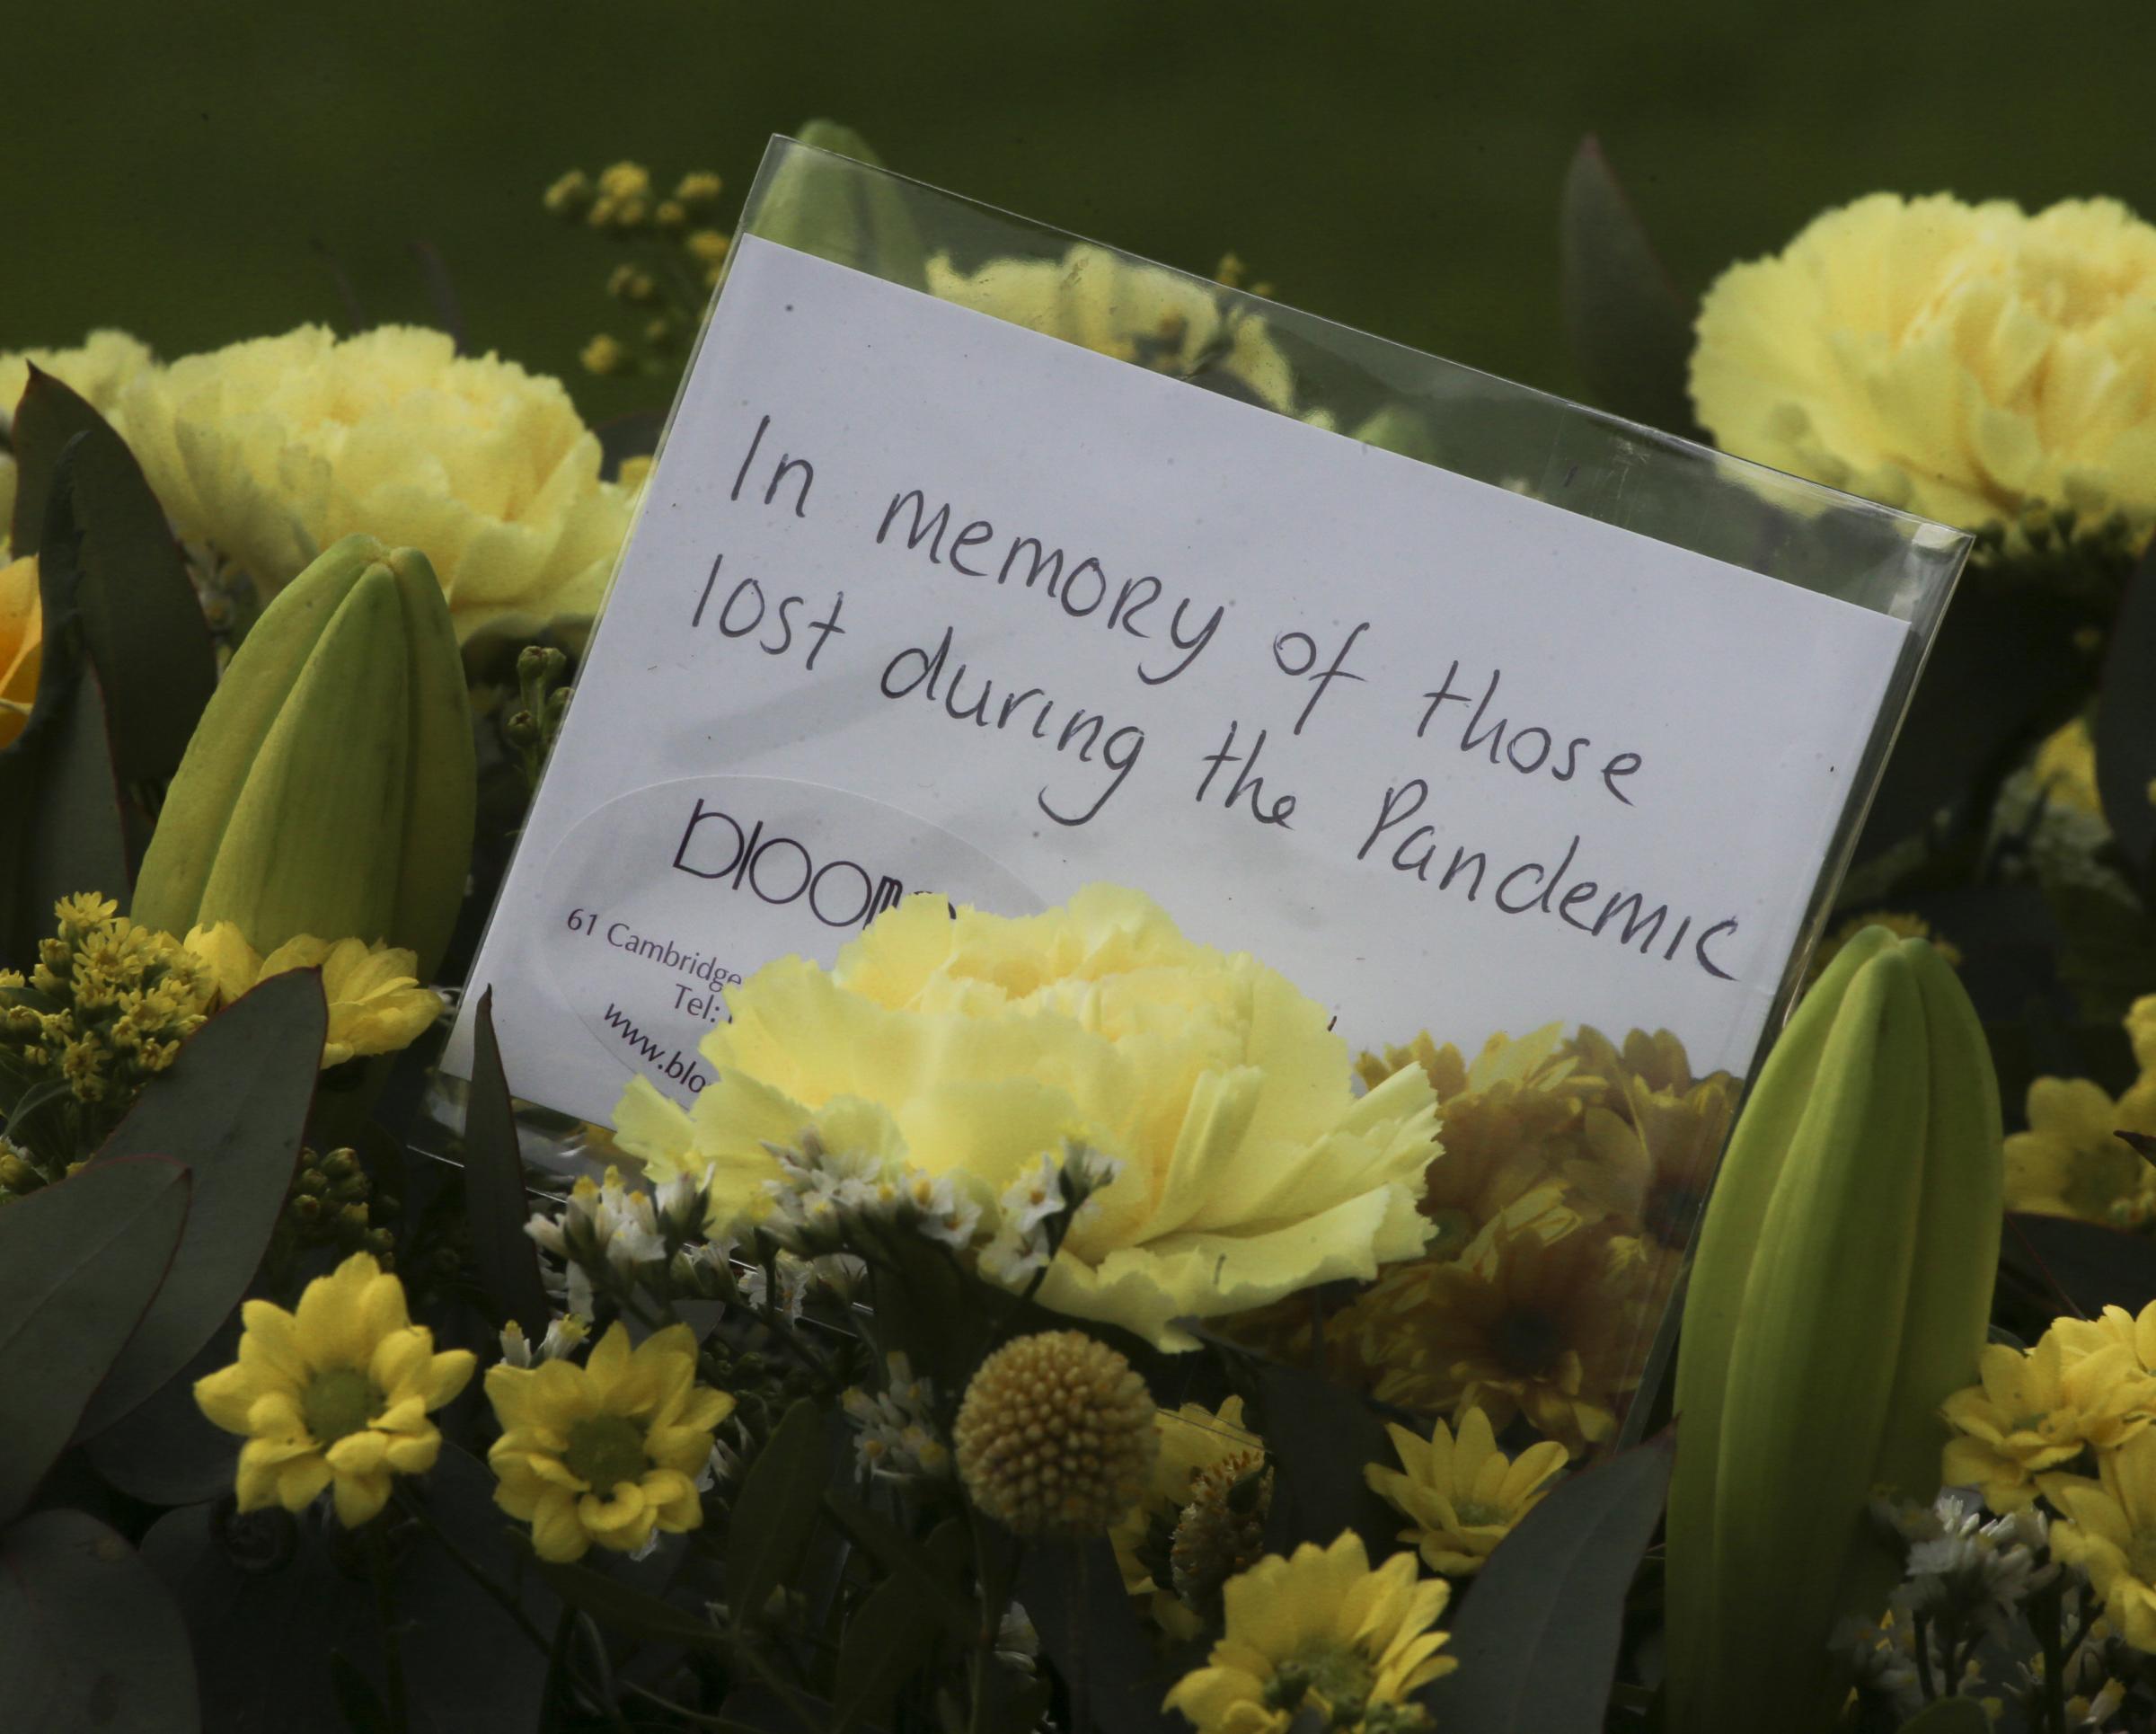 Deputy First Minister John Swinney laid a wreath in memory of those lost during the pandemic